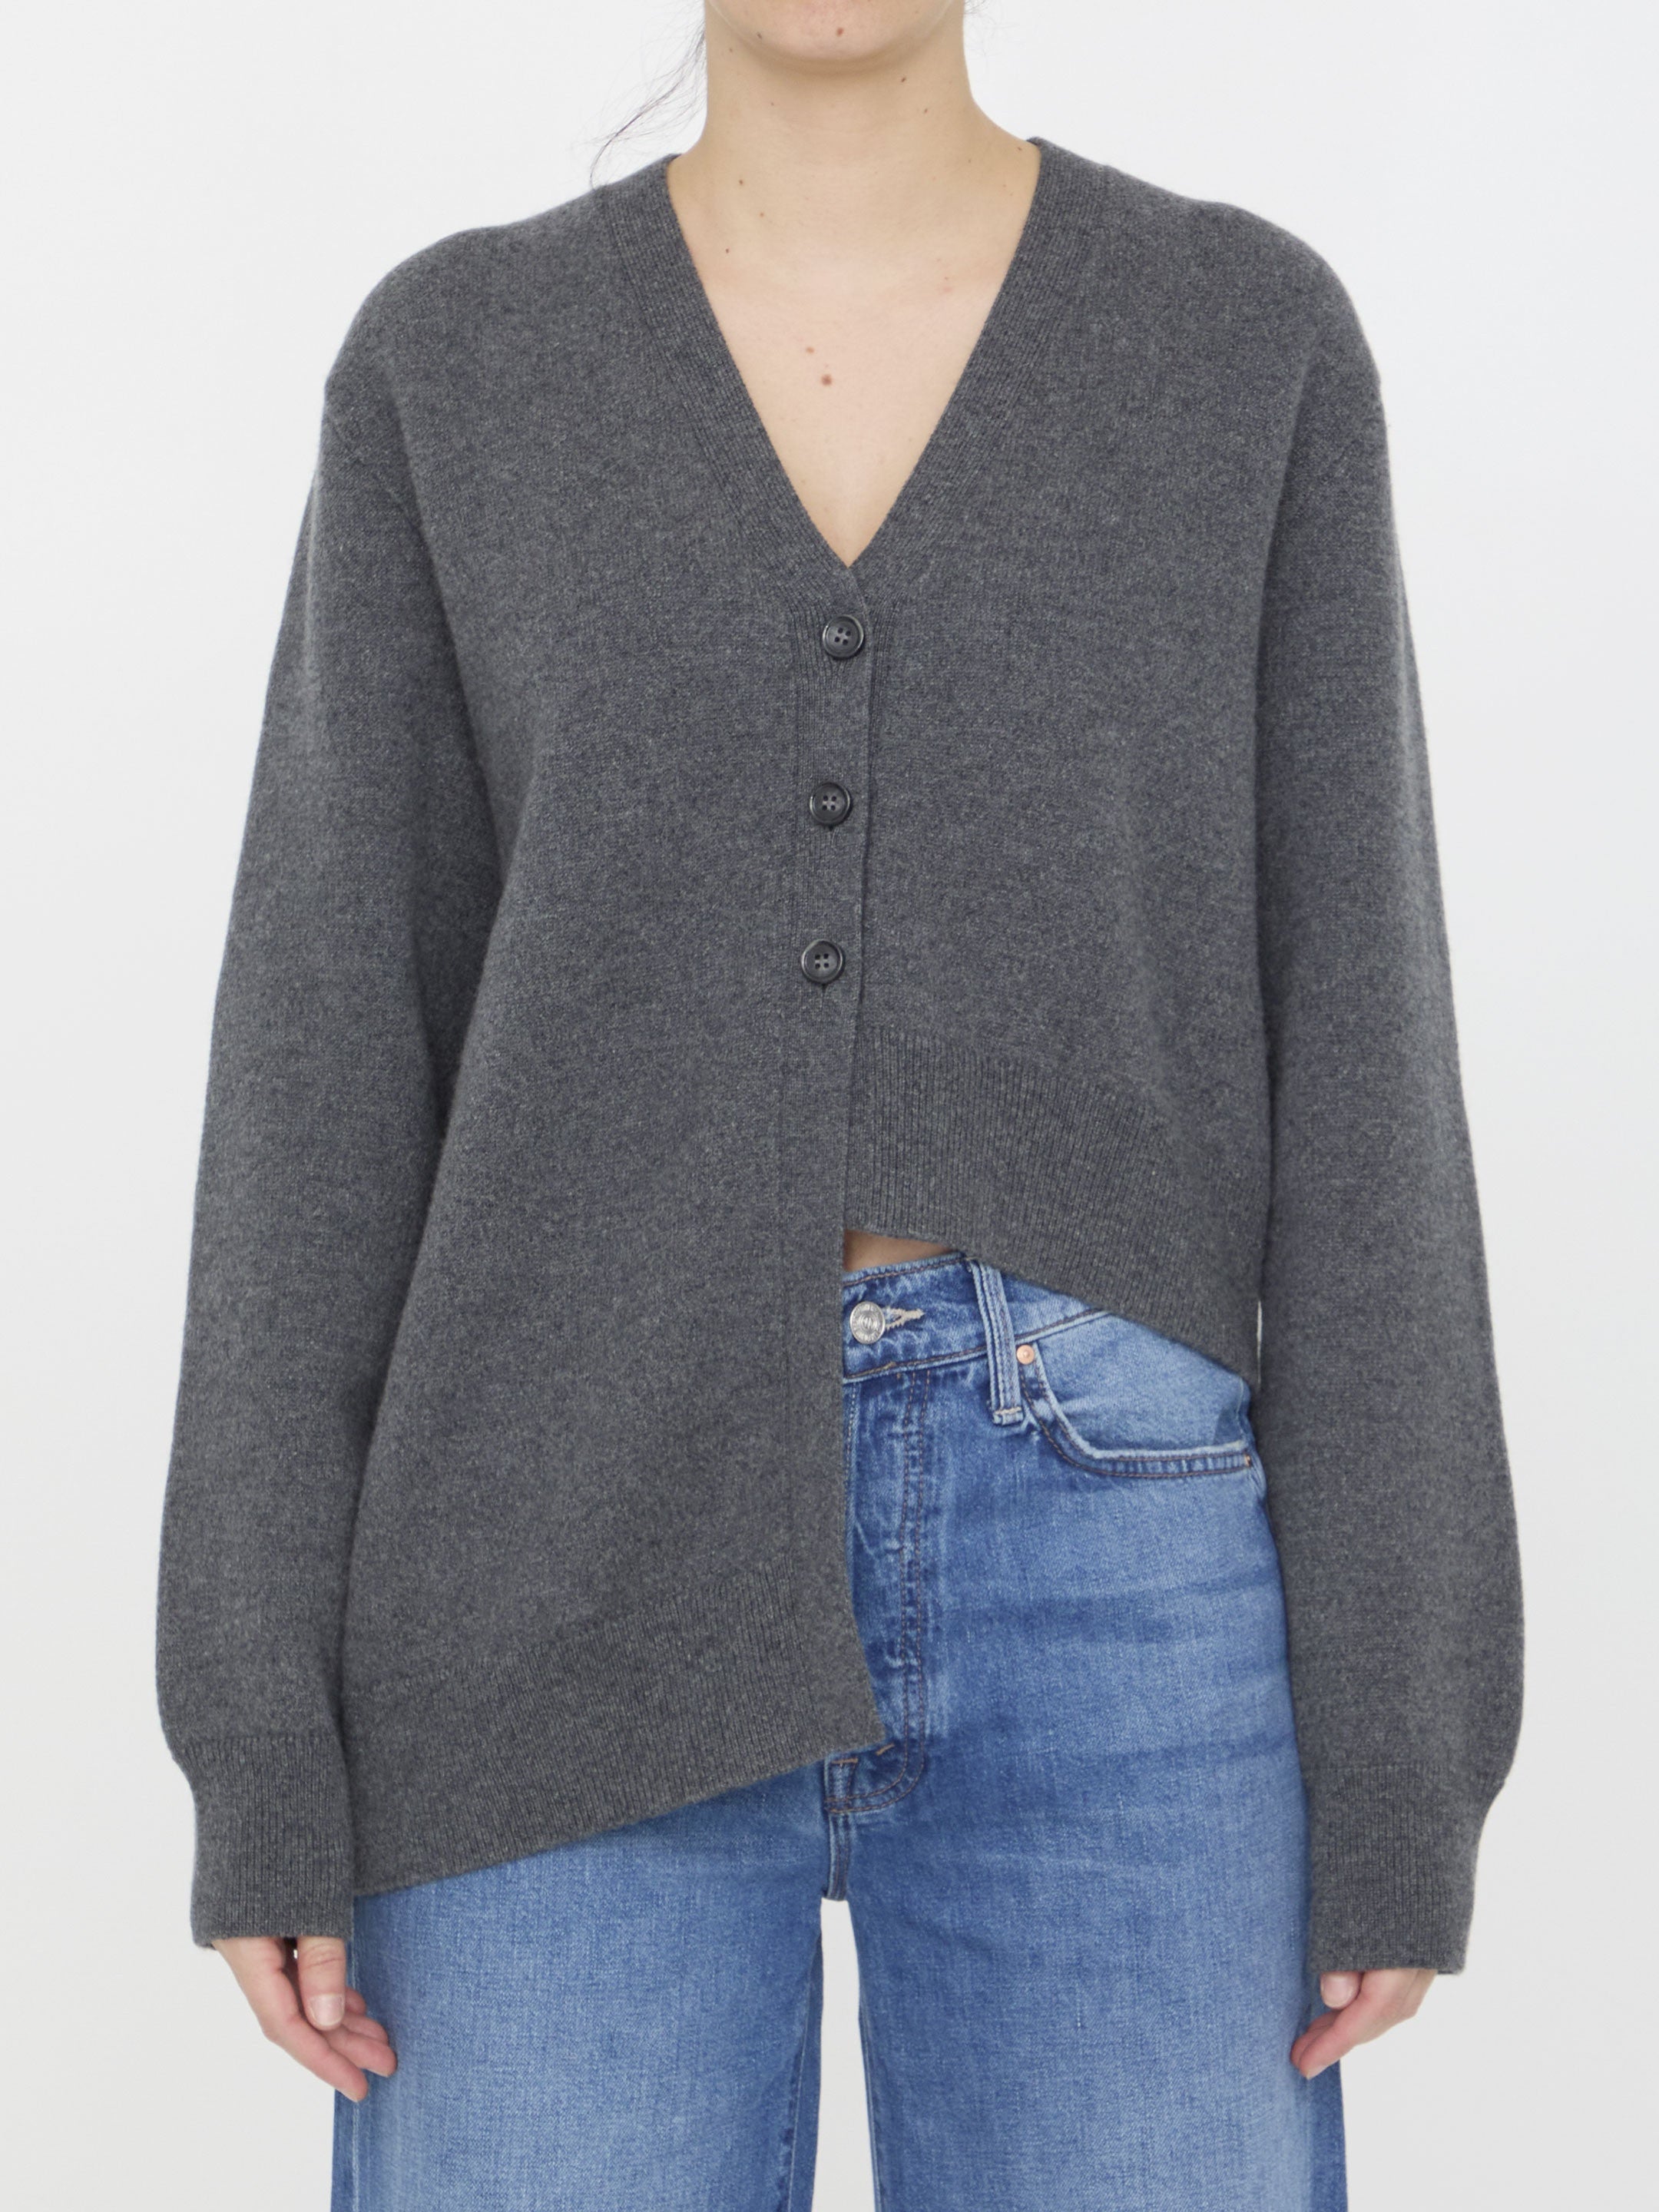 LOEWE-OUTLET-SALE-Asymmetric-cardigan-in-cashmere-Strick-M-GREY-ARCHIVE-COLLECTION.jpg